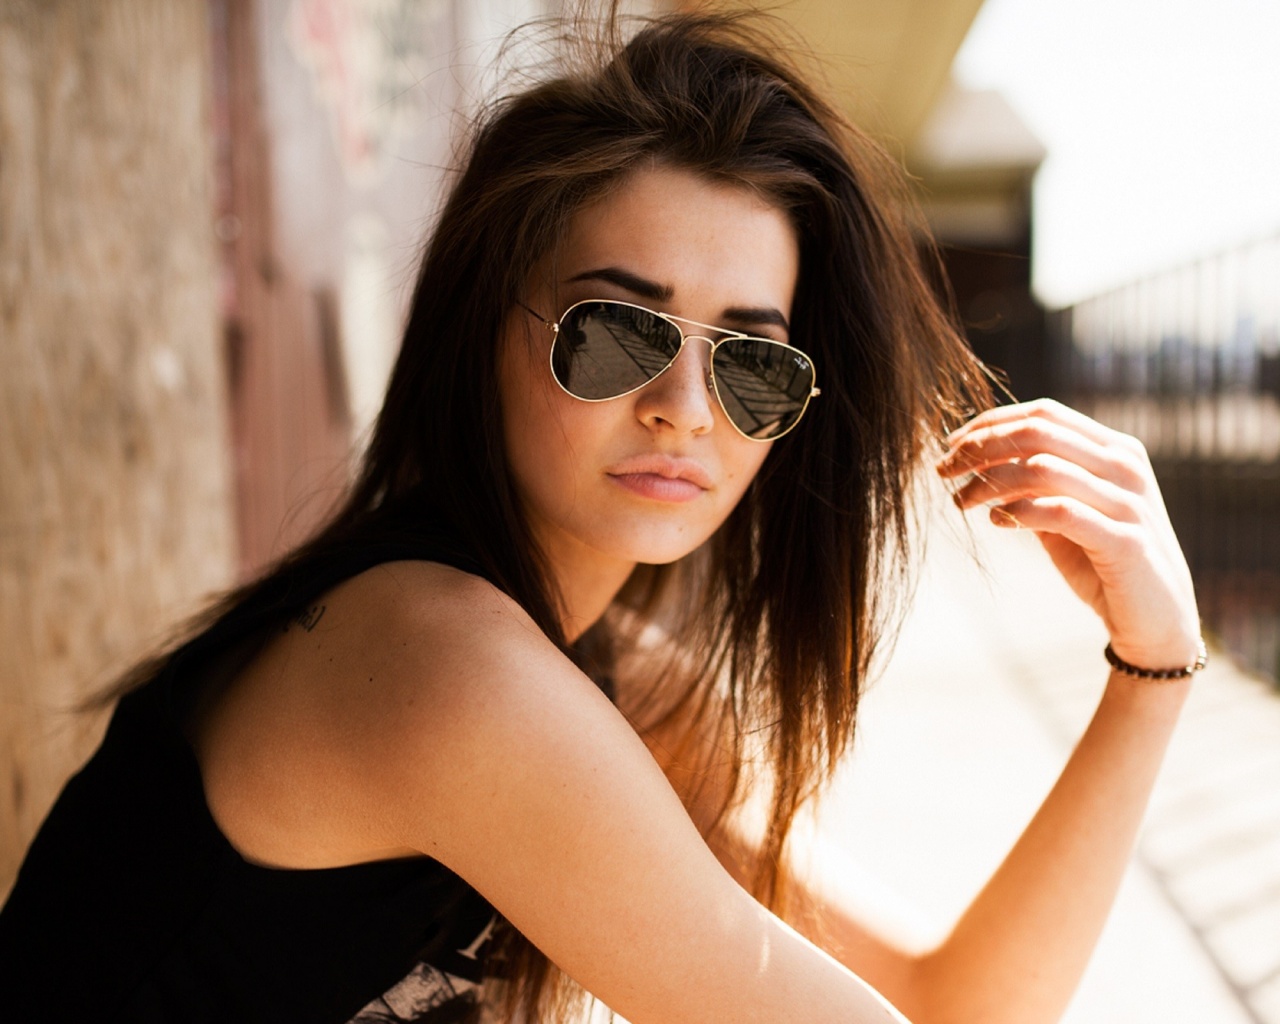 woman-with-sunglasses-1280x1024